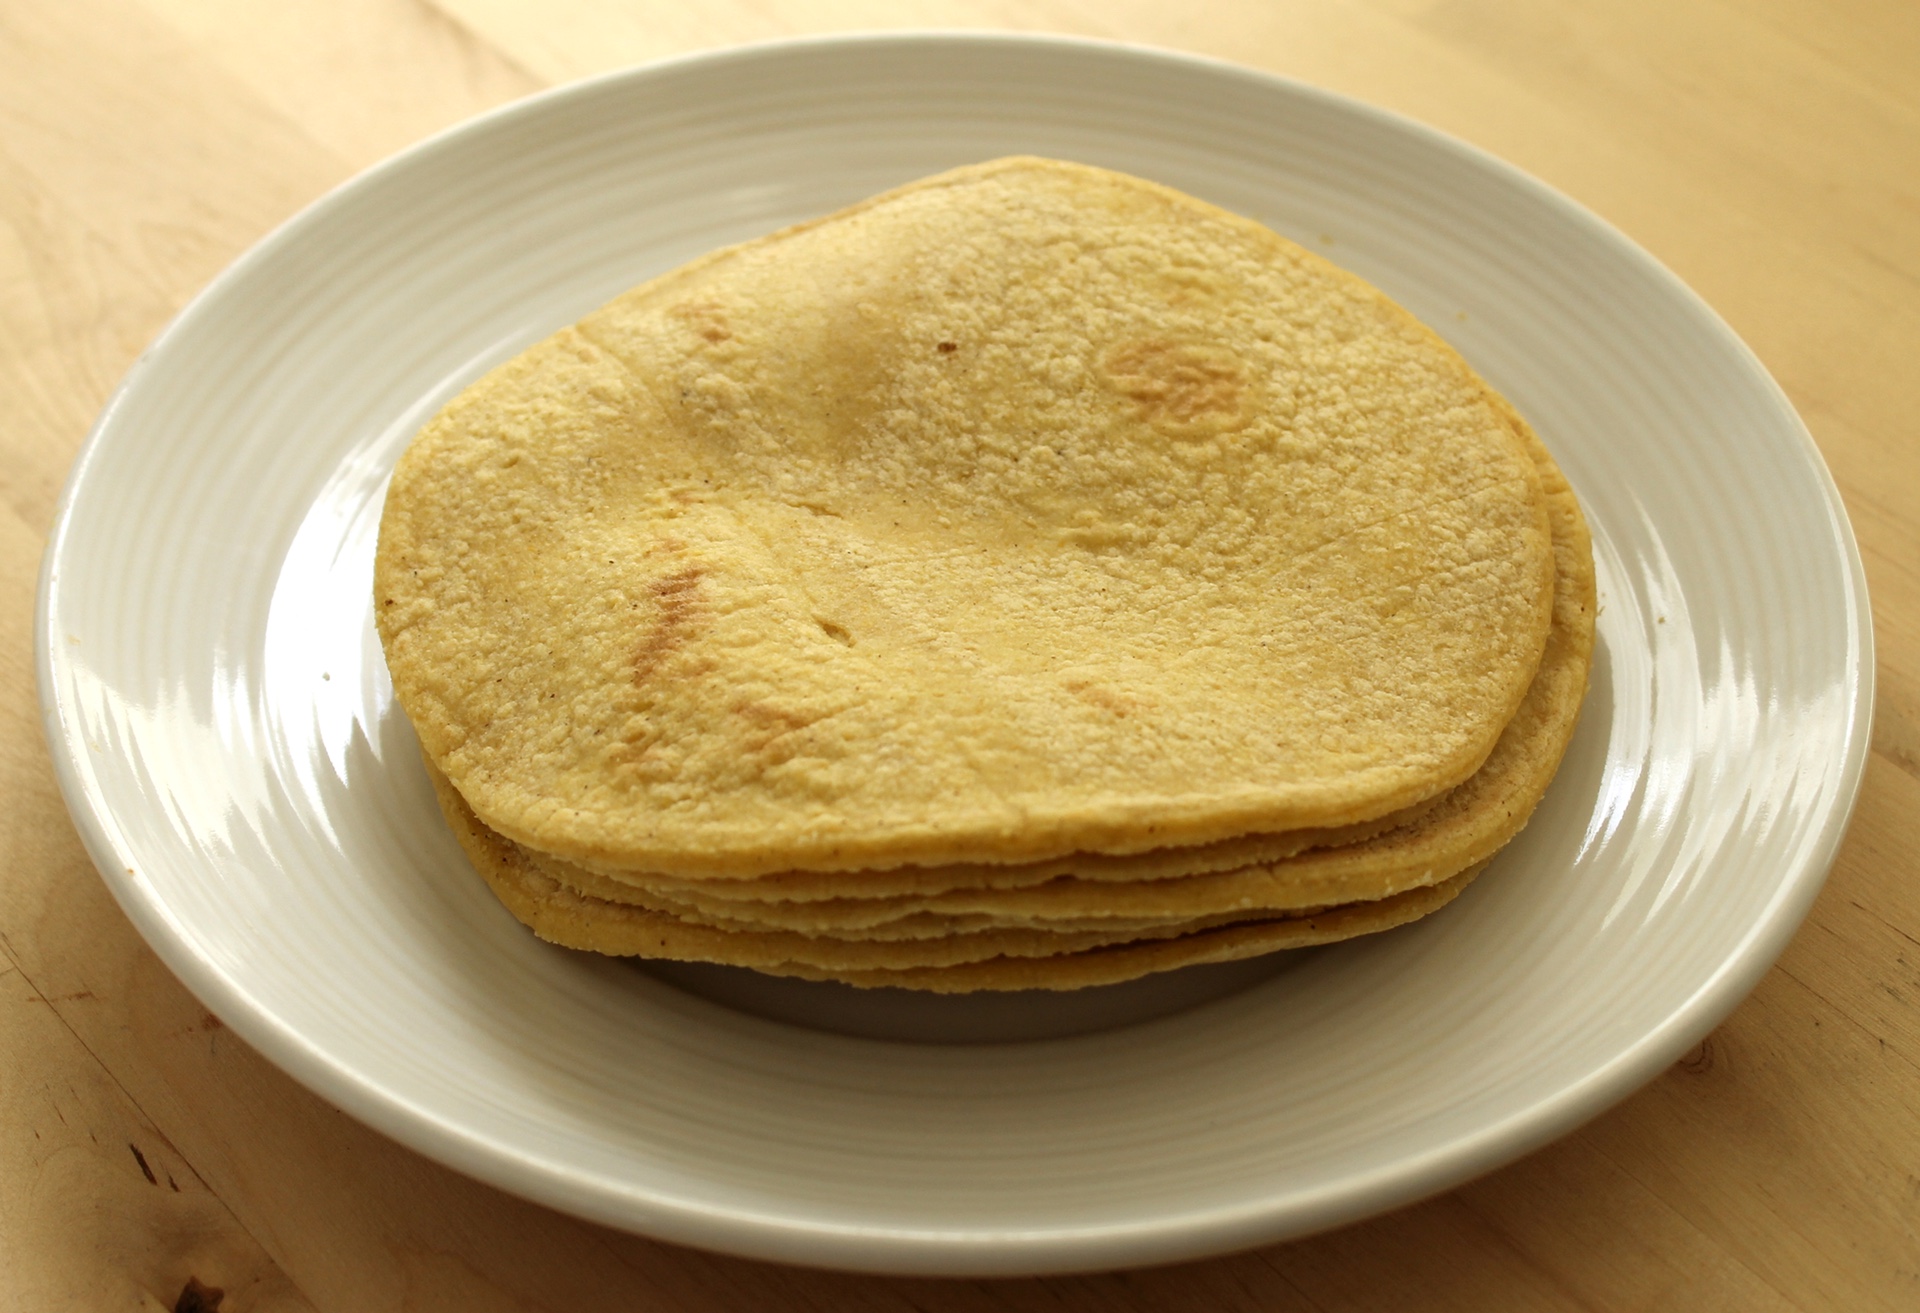 Primavera’s tortillas are widely available across the Bay Area.